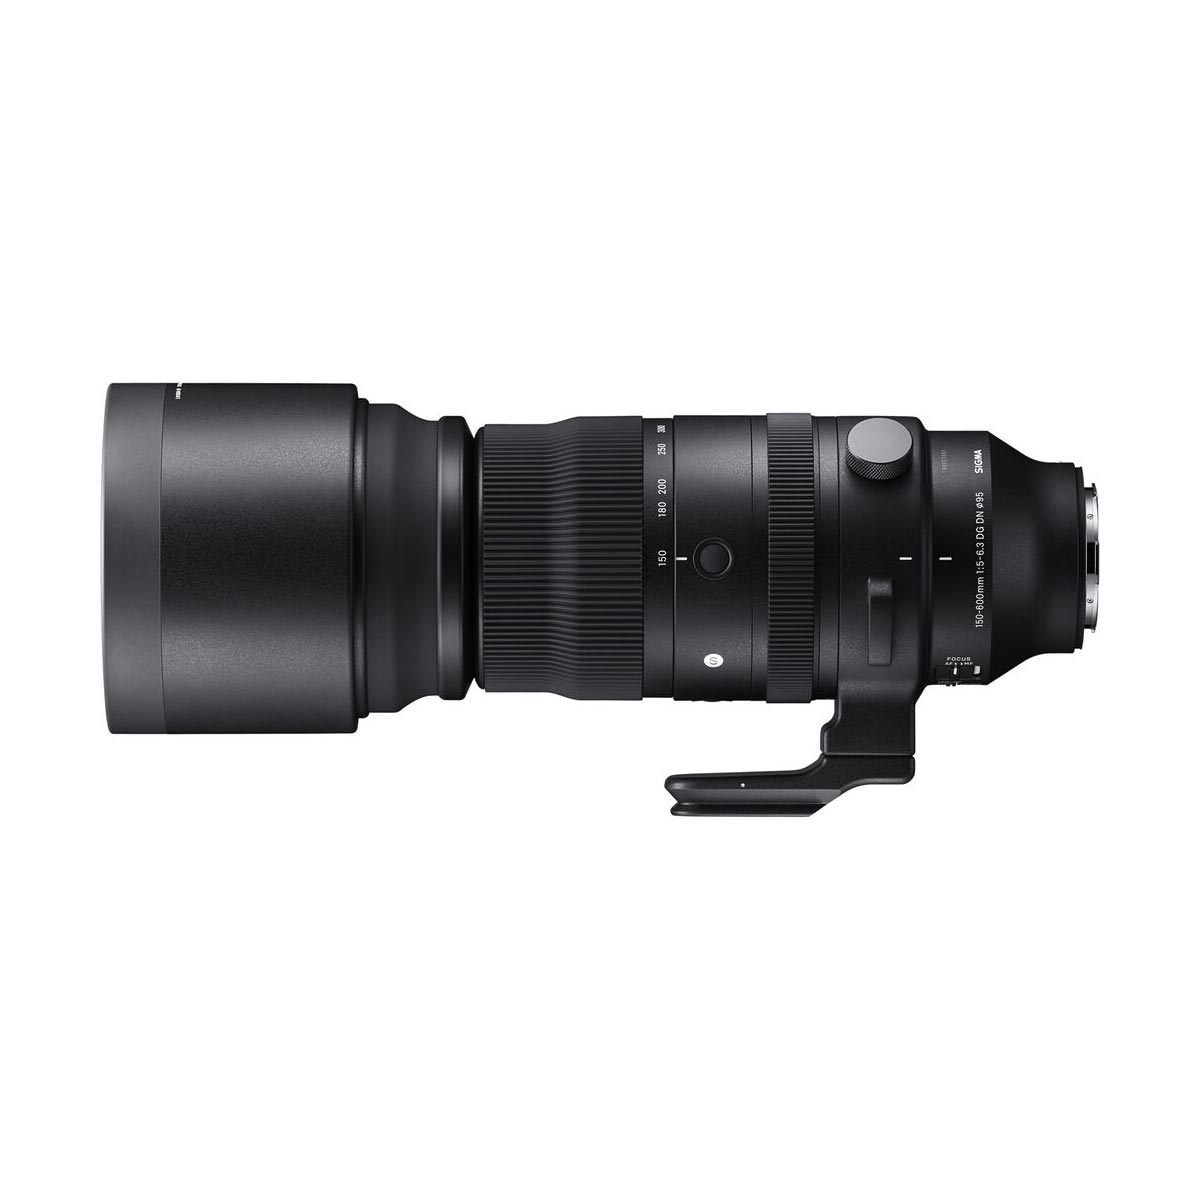 Sigma 150-600mm f/5-6.3 DG DN OS Sports Lens for Sony FE *OPEN BOX*